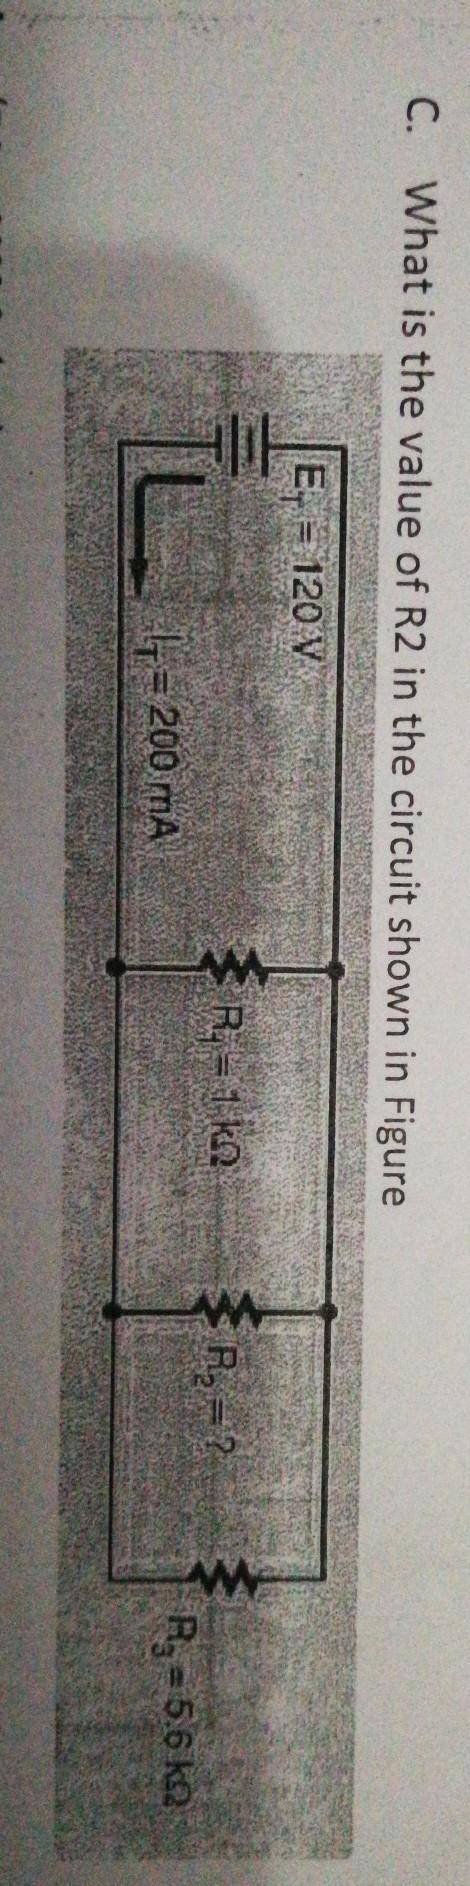 What is the value of R2 in the circuit shown below